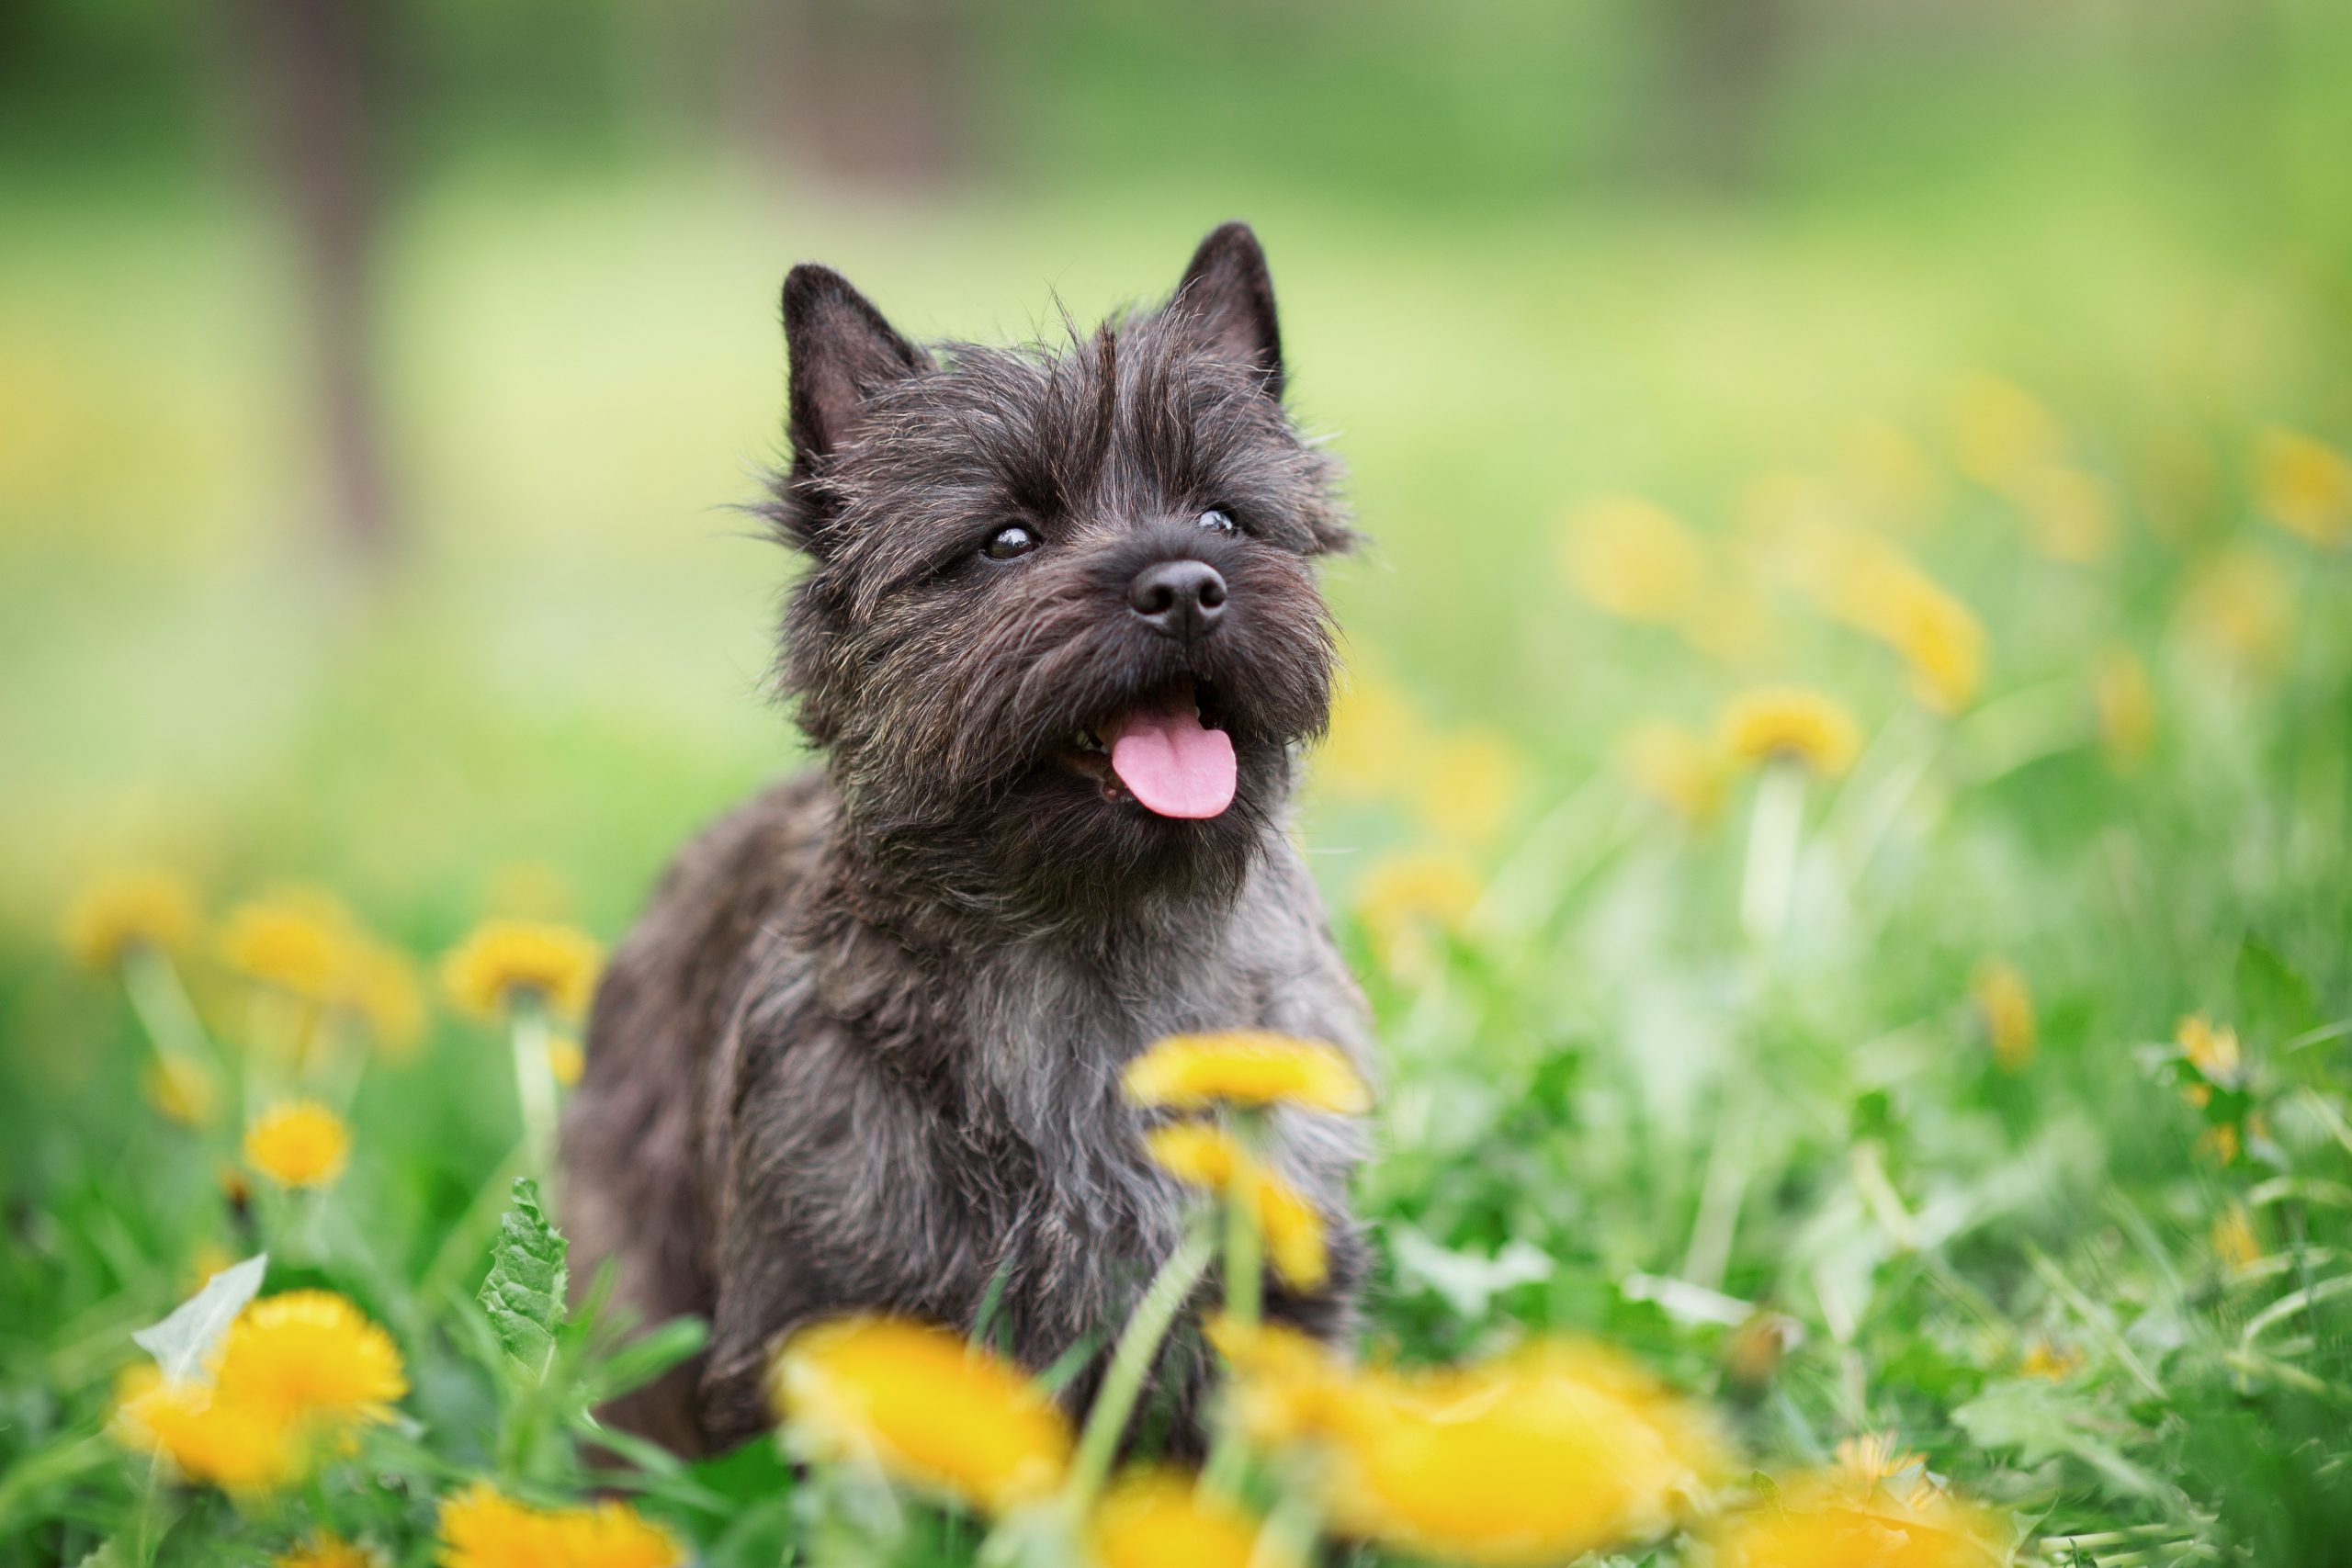 are cairn terriers intelligent